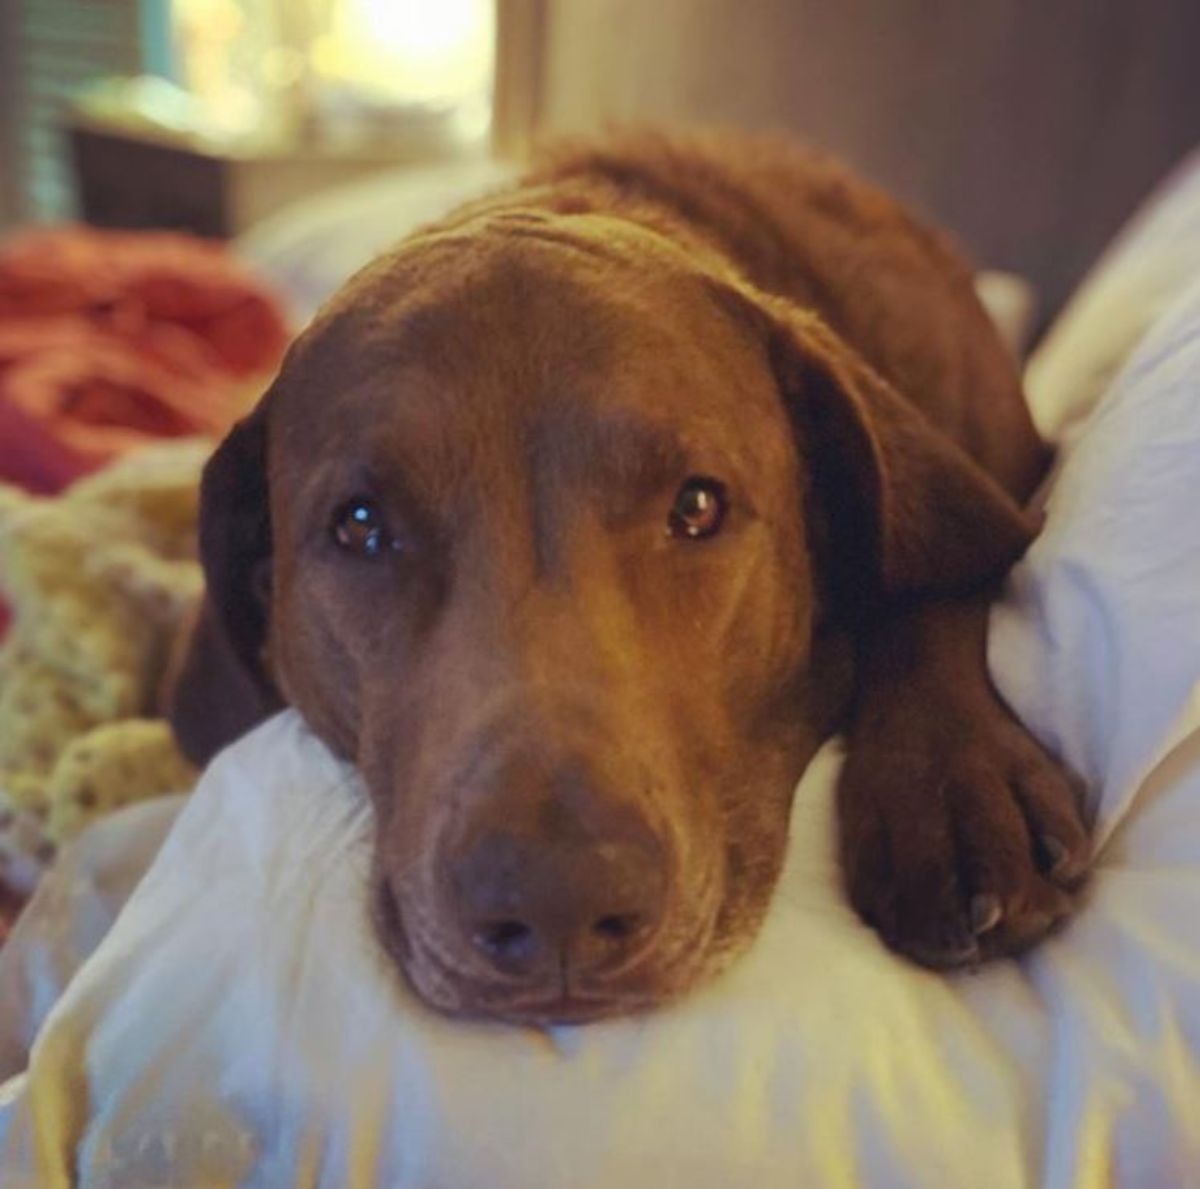 Chesapeake Bay Retriever lying down on the bed with its sad eyes